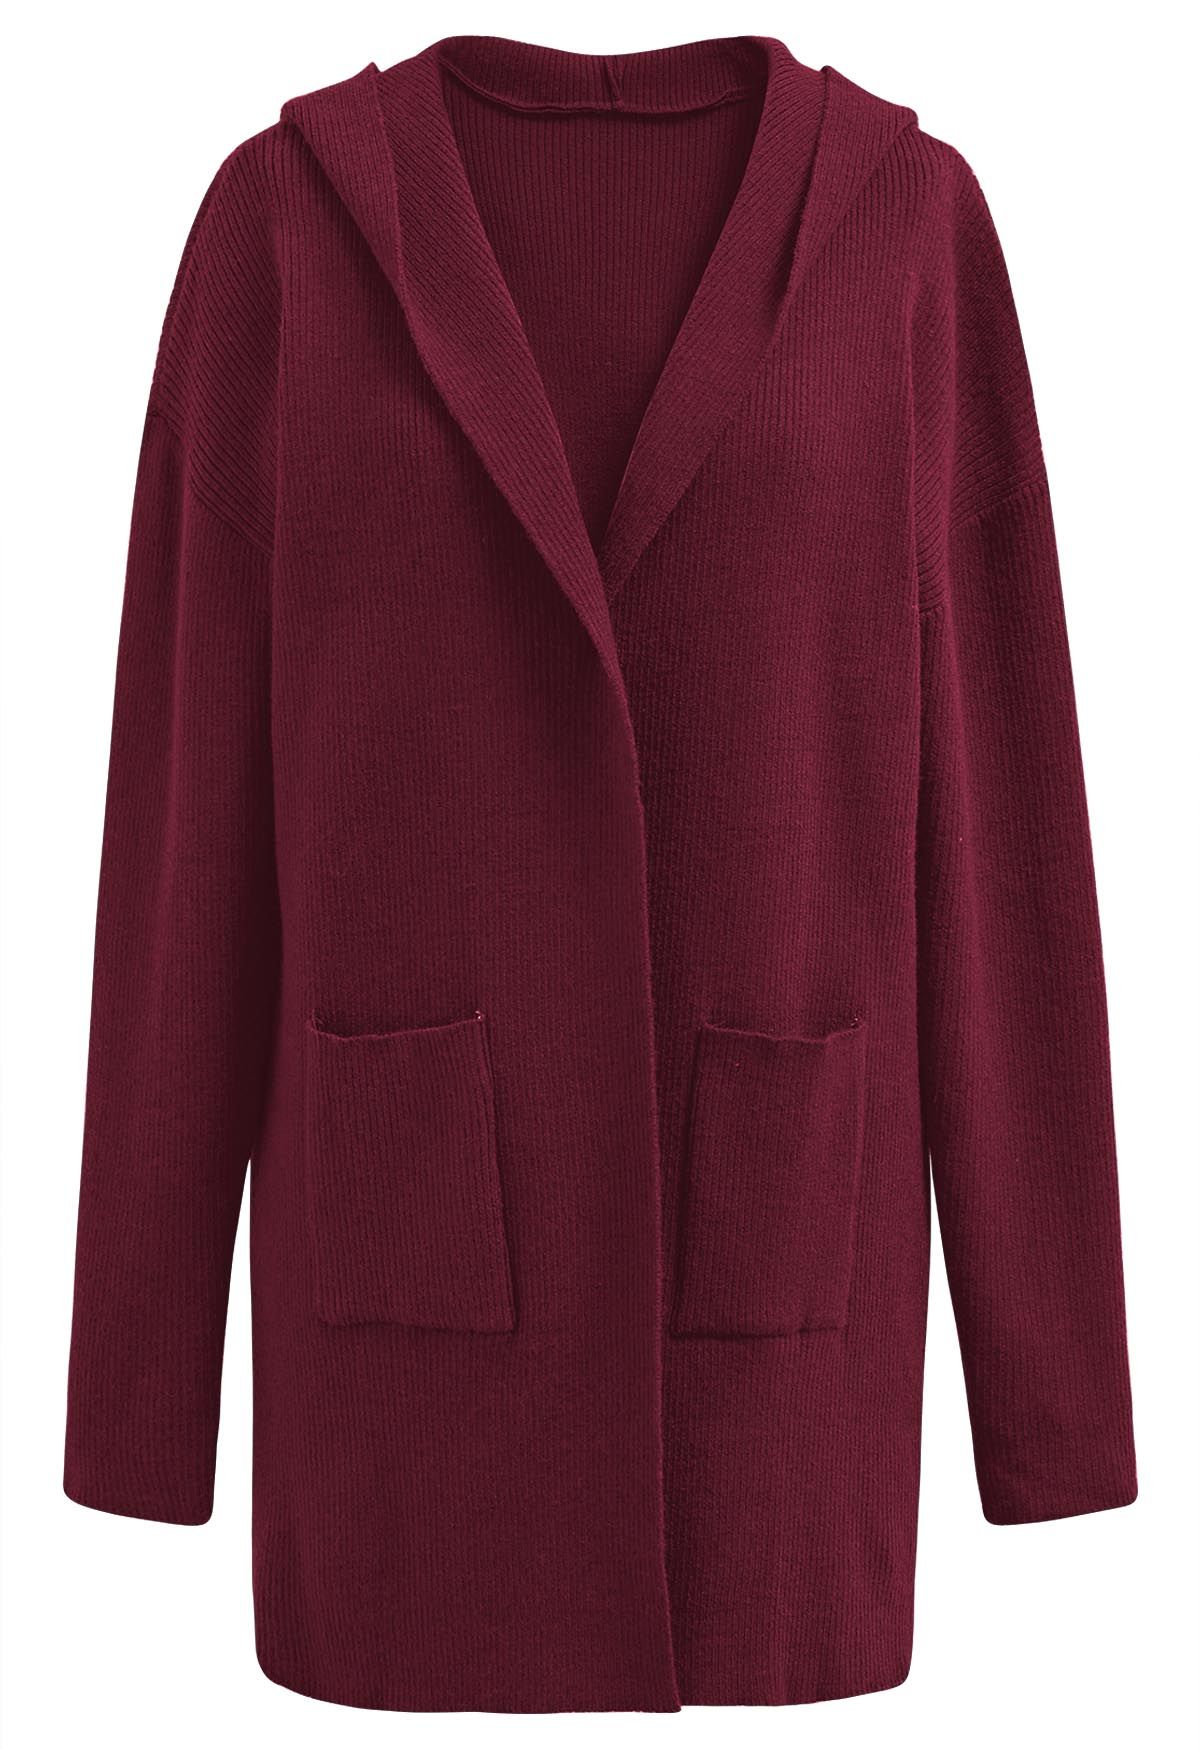 Patch Pockets Open Front Hooded Cardigan in Burgundy